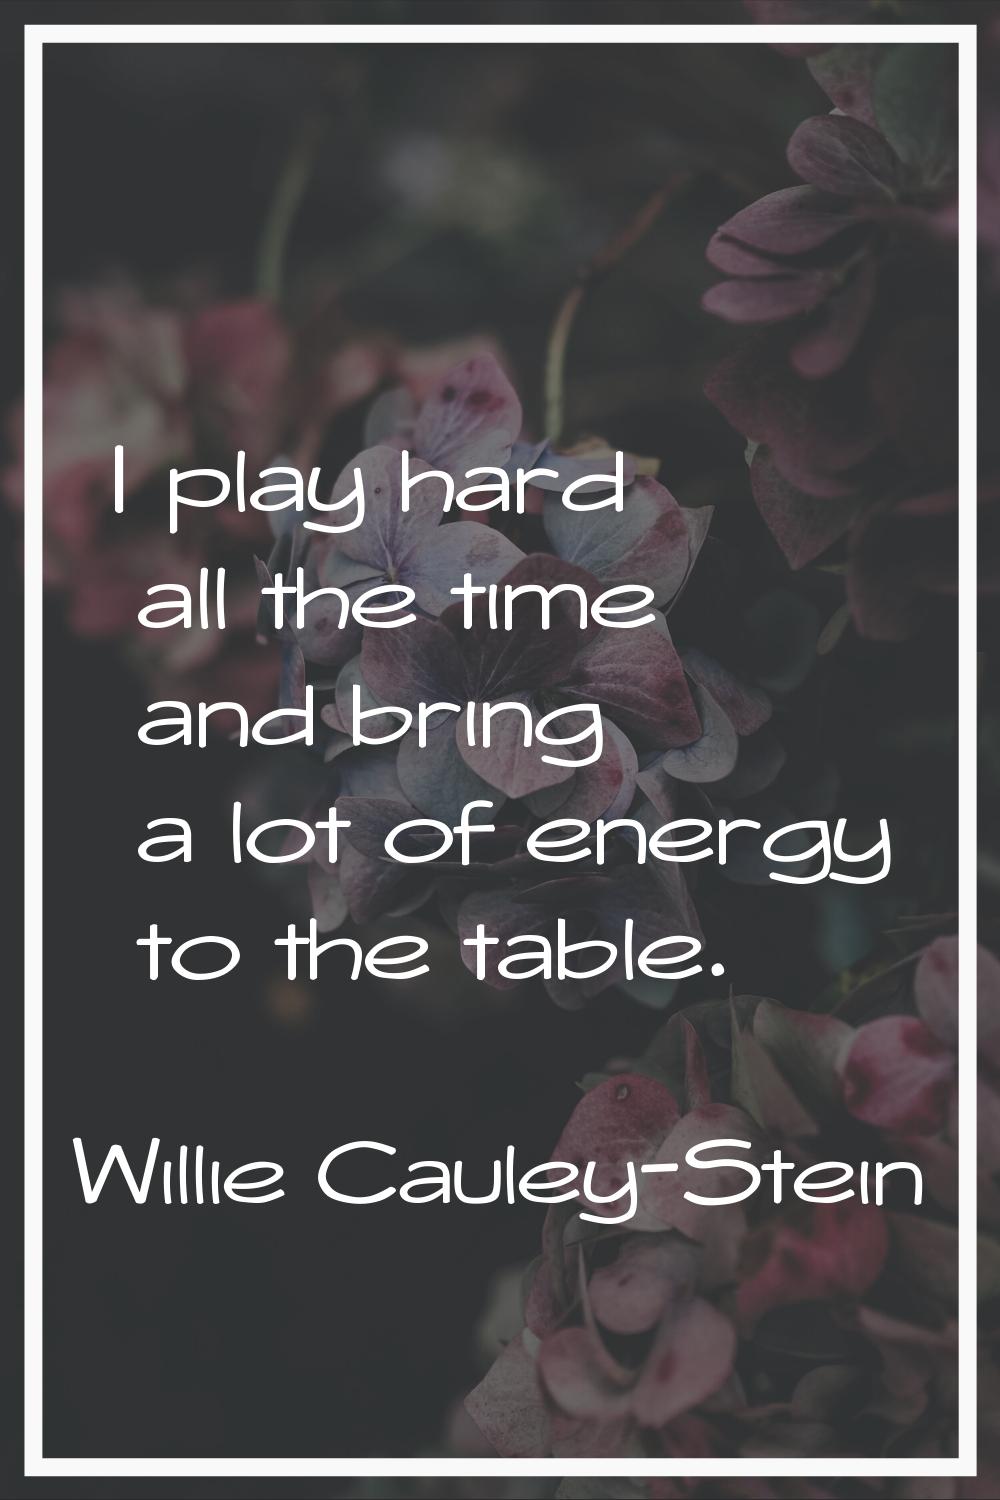 I play hard all the time and bring a lot of energy to the table.